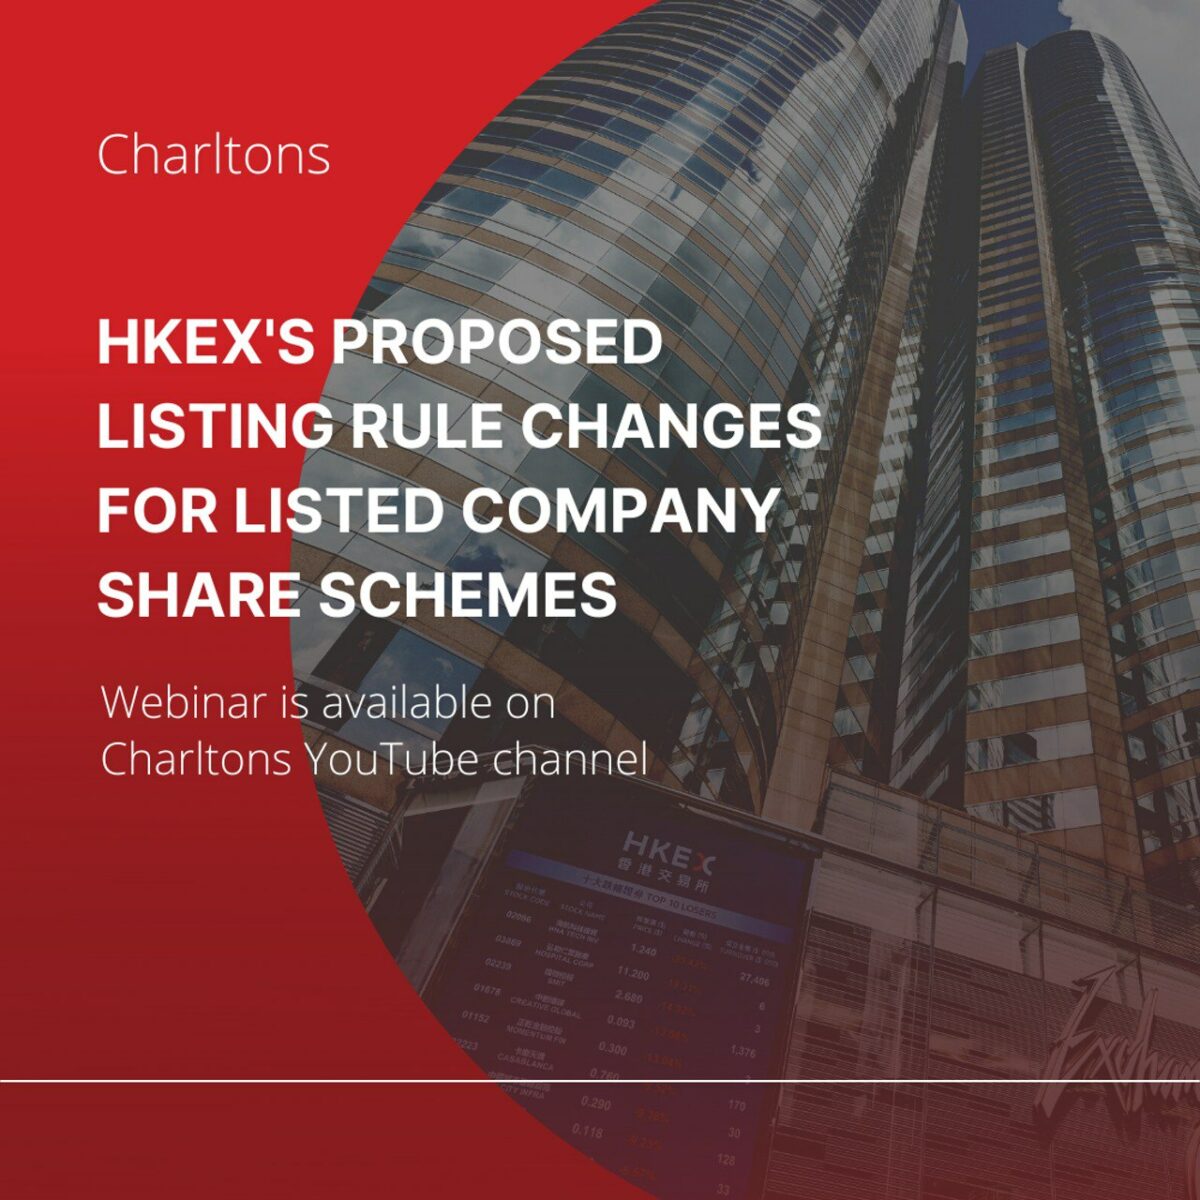 Recording | Webinar on the HKEX’s proposed Listing Rule changes for listed company share schemes